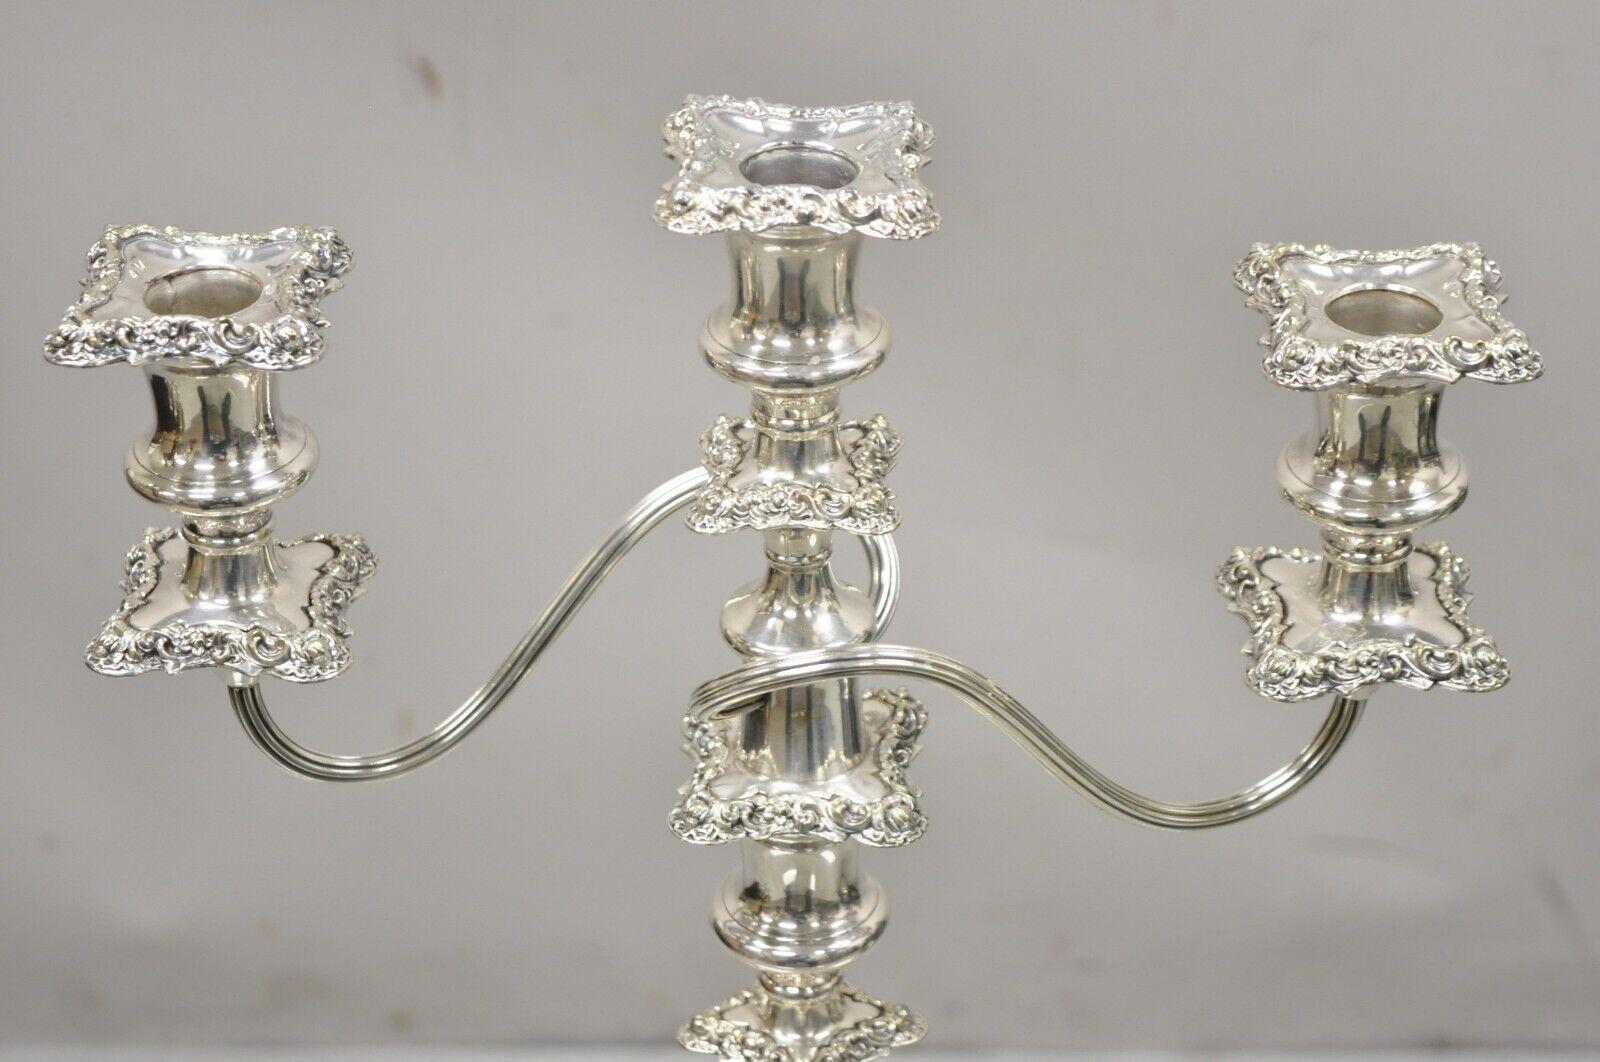 Victorian Antique Gorham Floral Repousse Twin Arm Silver Plated Candlestick Candelabra For Sale